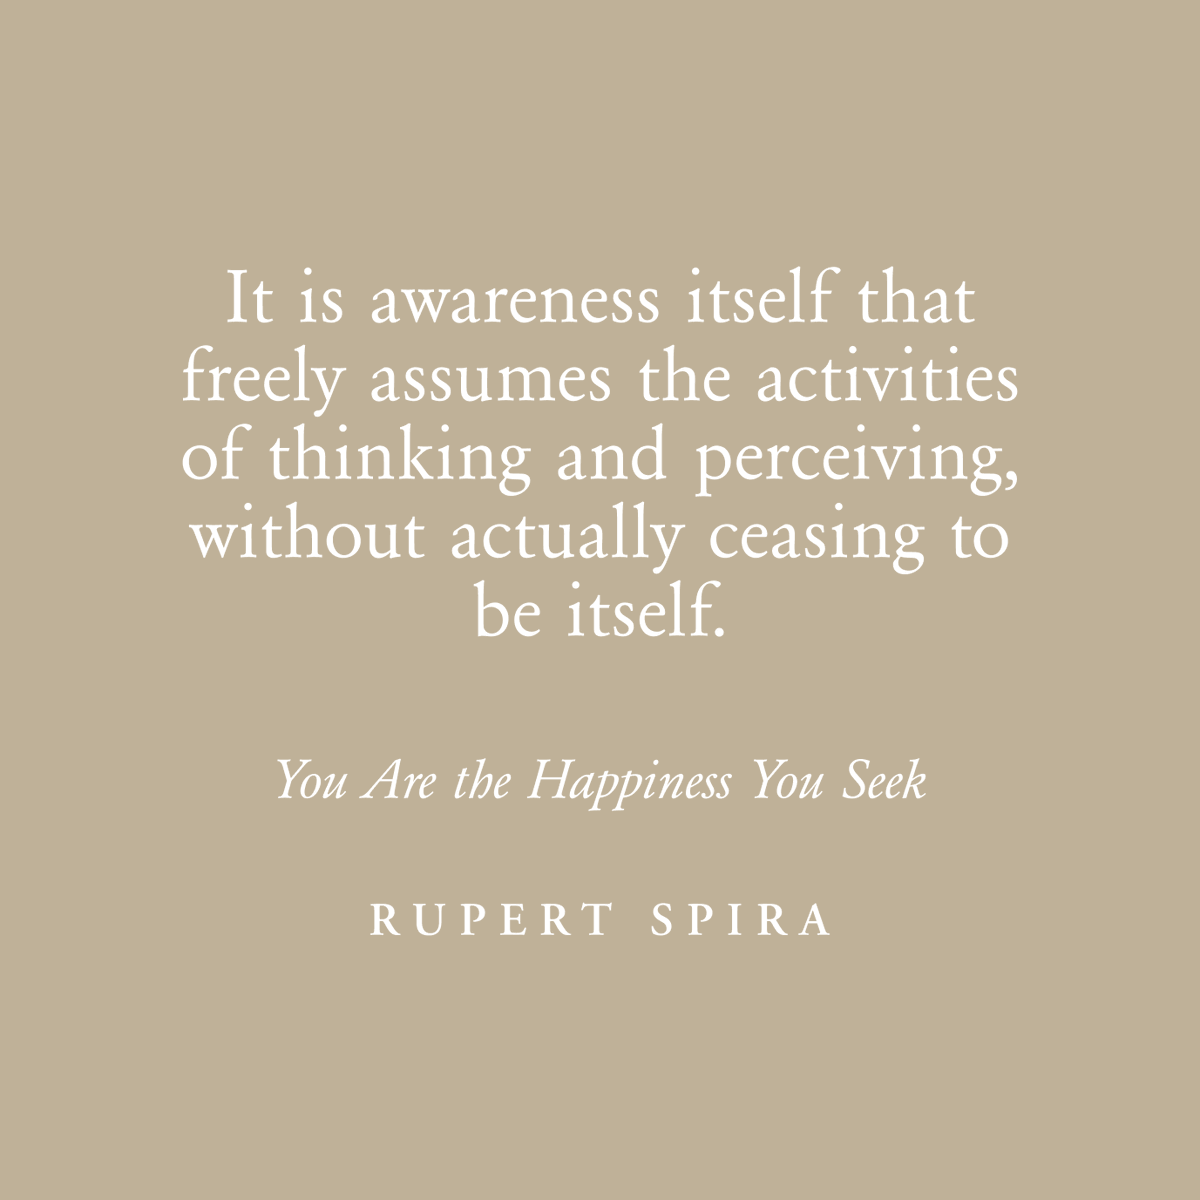 It is awareness itself that freely assumes the activities of thinking and perceiving, without actually ceasing to be itself. – Rupert Spira, You Are The Happiness You Seek To continue reading, order your copy: rupertspira.com/store